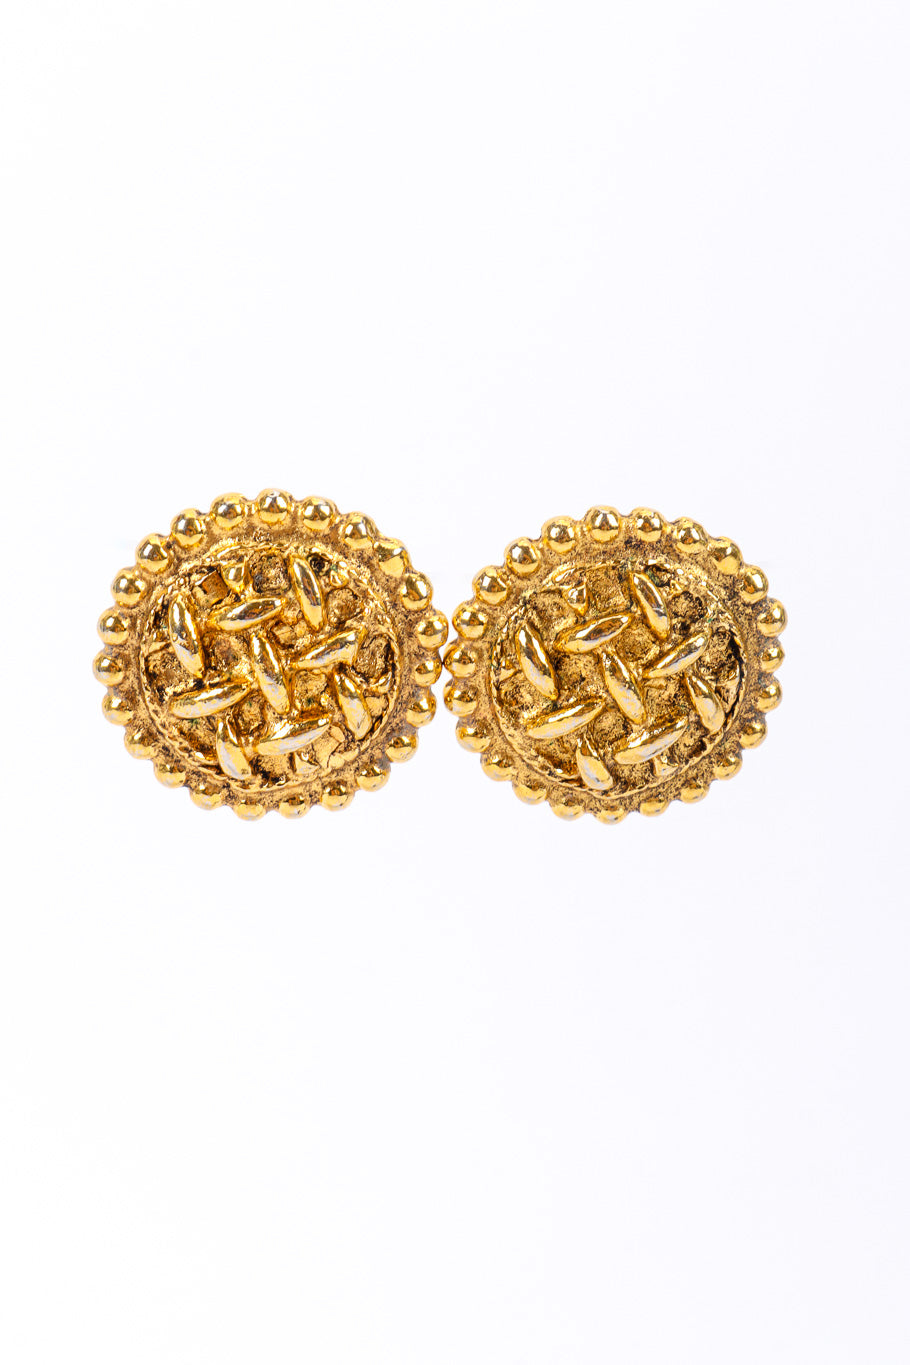 Vintage Chanel Woven Button Earrings front view @recessla